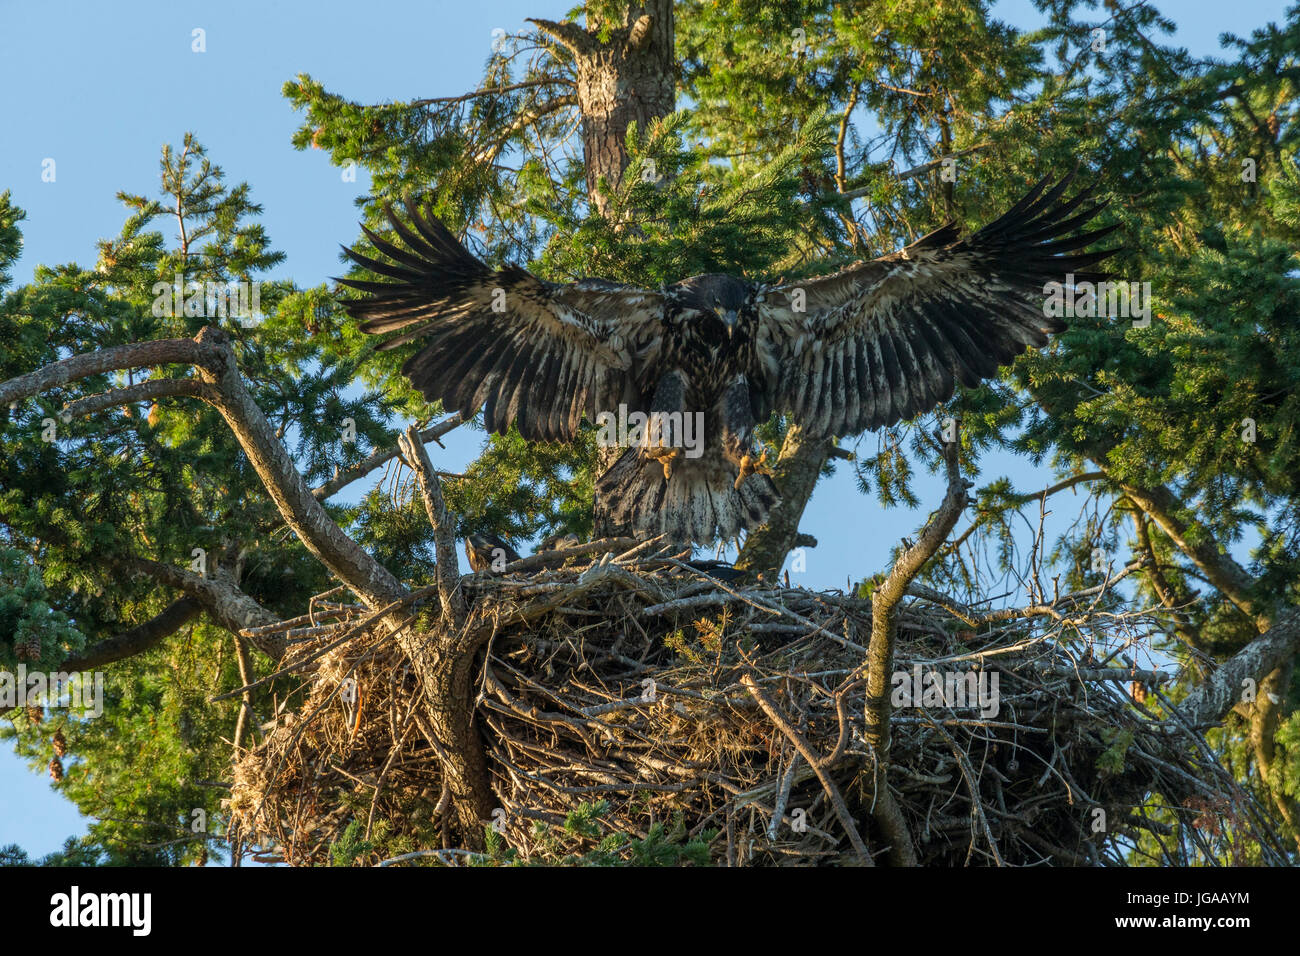 Juvenile Bald eagle flapping wings in preparation for fledging from  nest at Robert's Bay-Sidney, British Columbia, Canada. Stock Photo